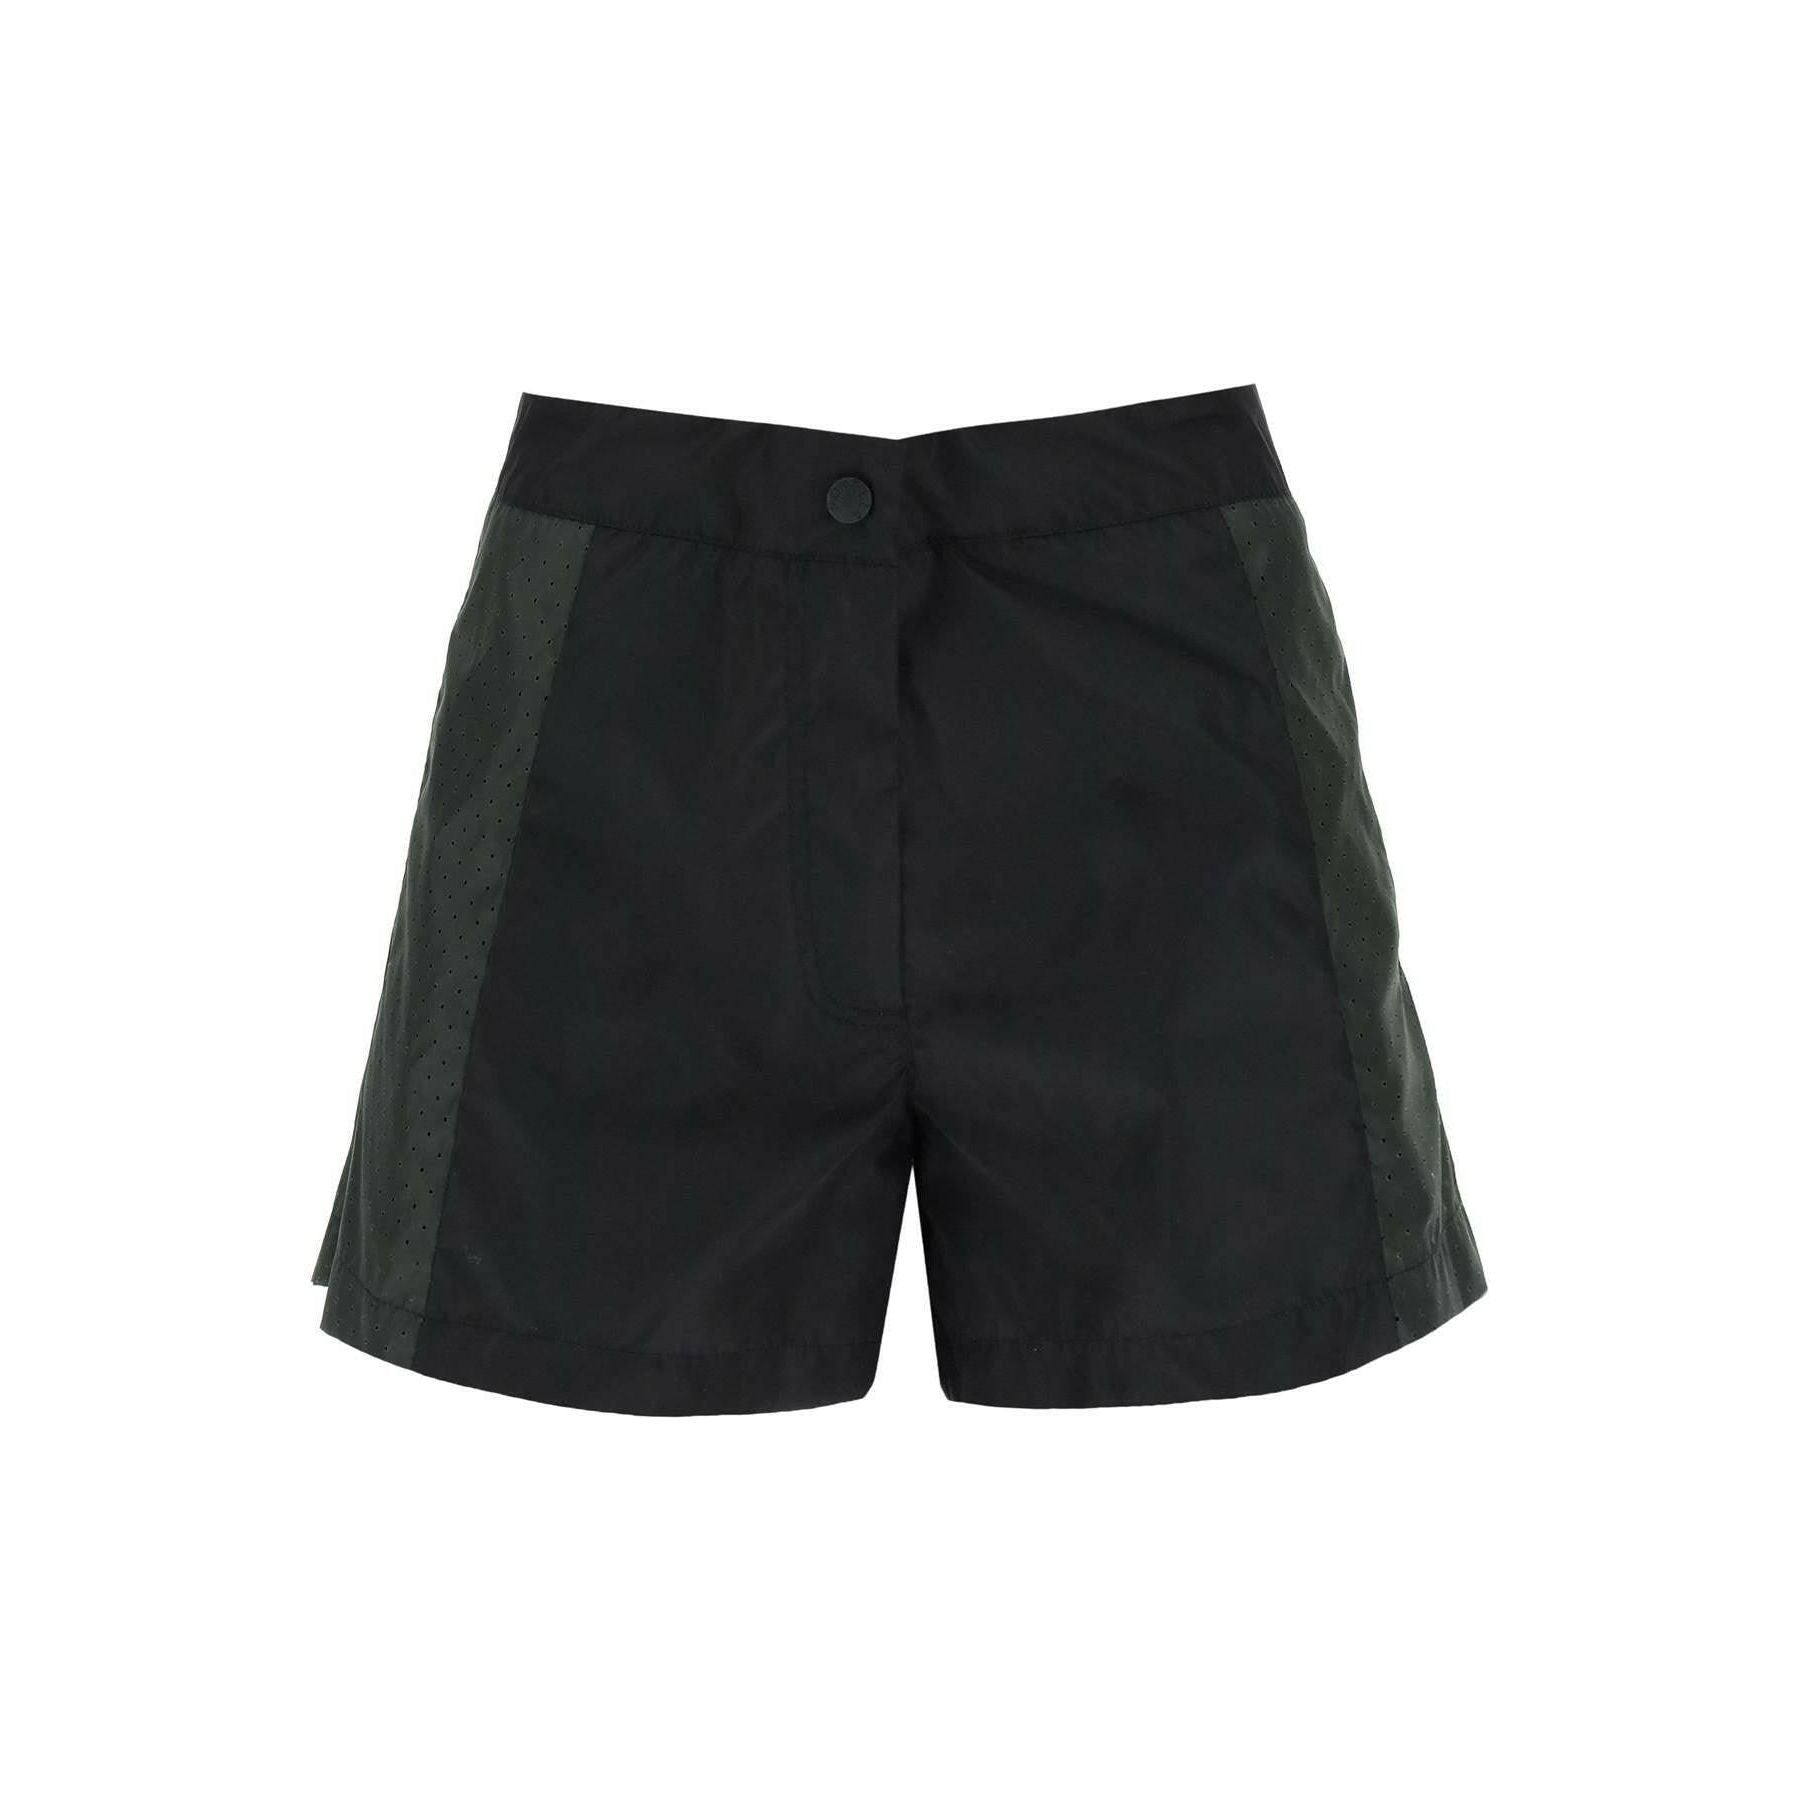 Nylon Shorts With Perforated Detailing MONCLER BORN TO PROTECT JOHN JULIA.